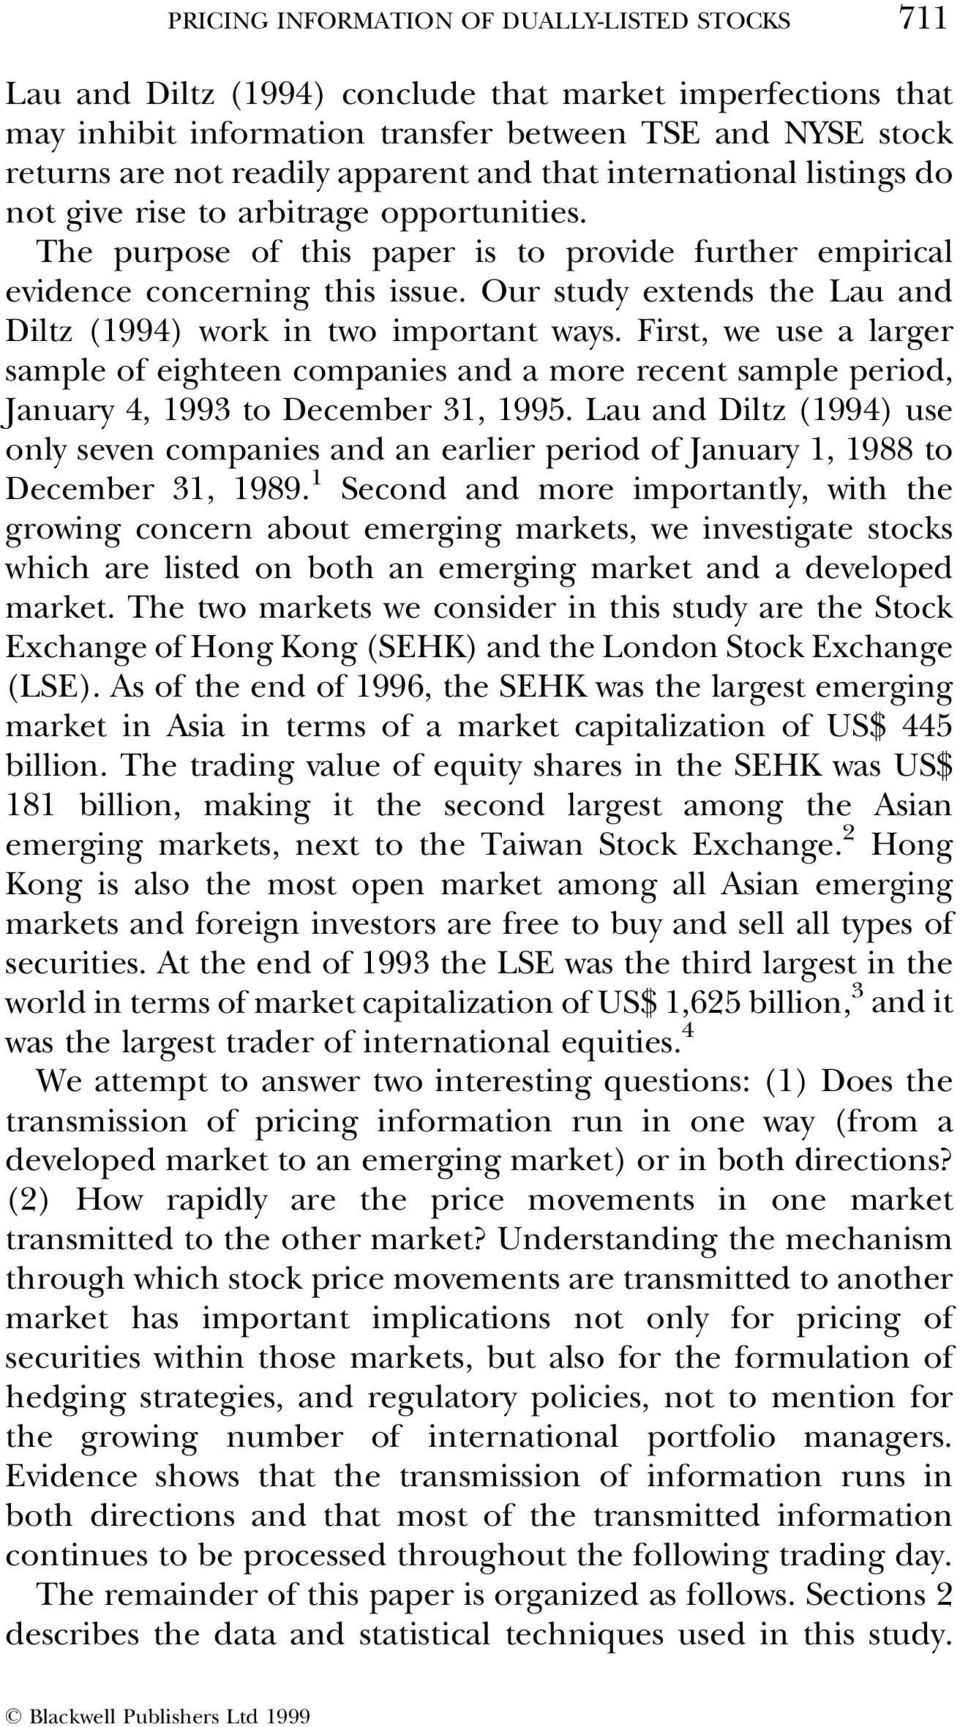 Our sudy exends he Lau and Dilz (1994) work in wo imporan ways. Firs, we use a larger sample of eigheen companies and a more recen sample period, January 4, 1993 o December 31, 1995.